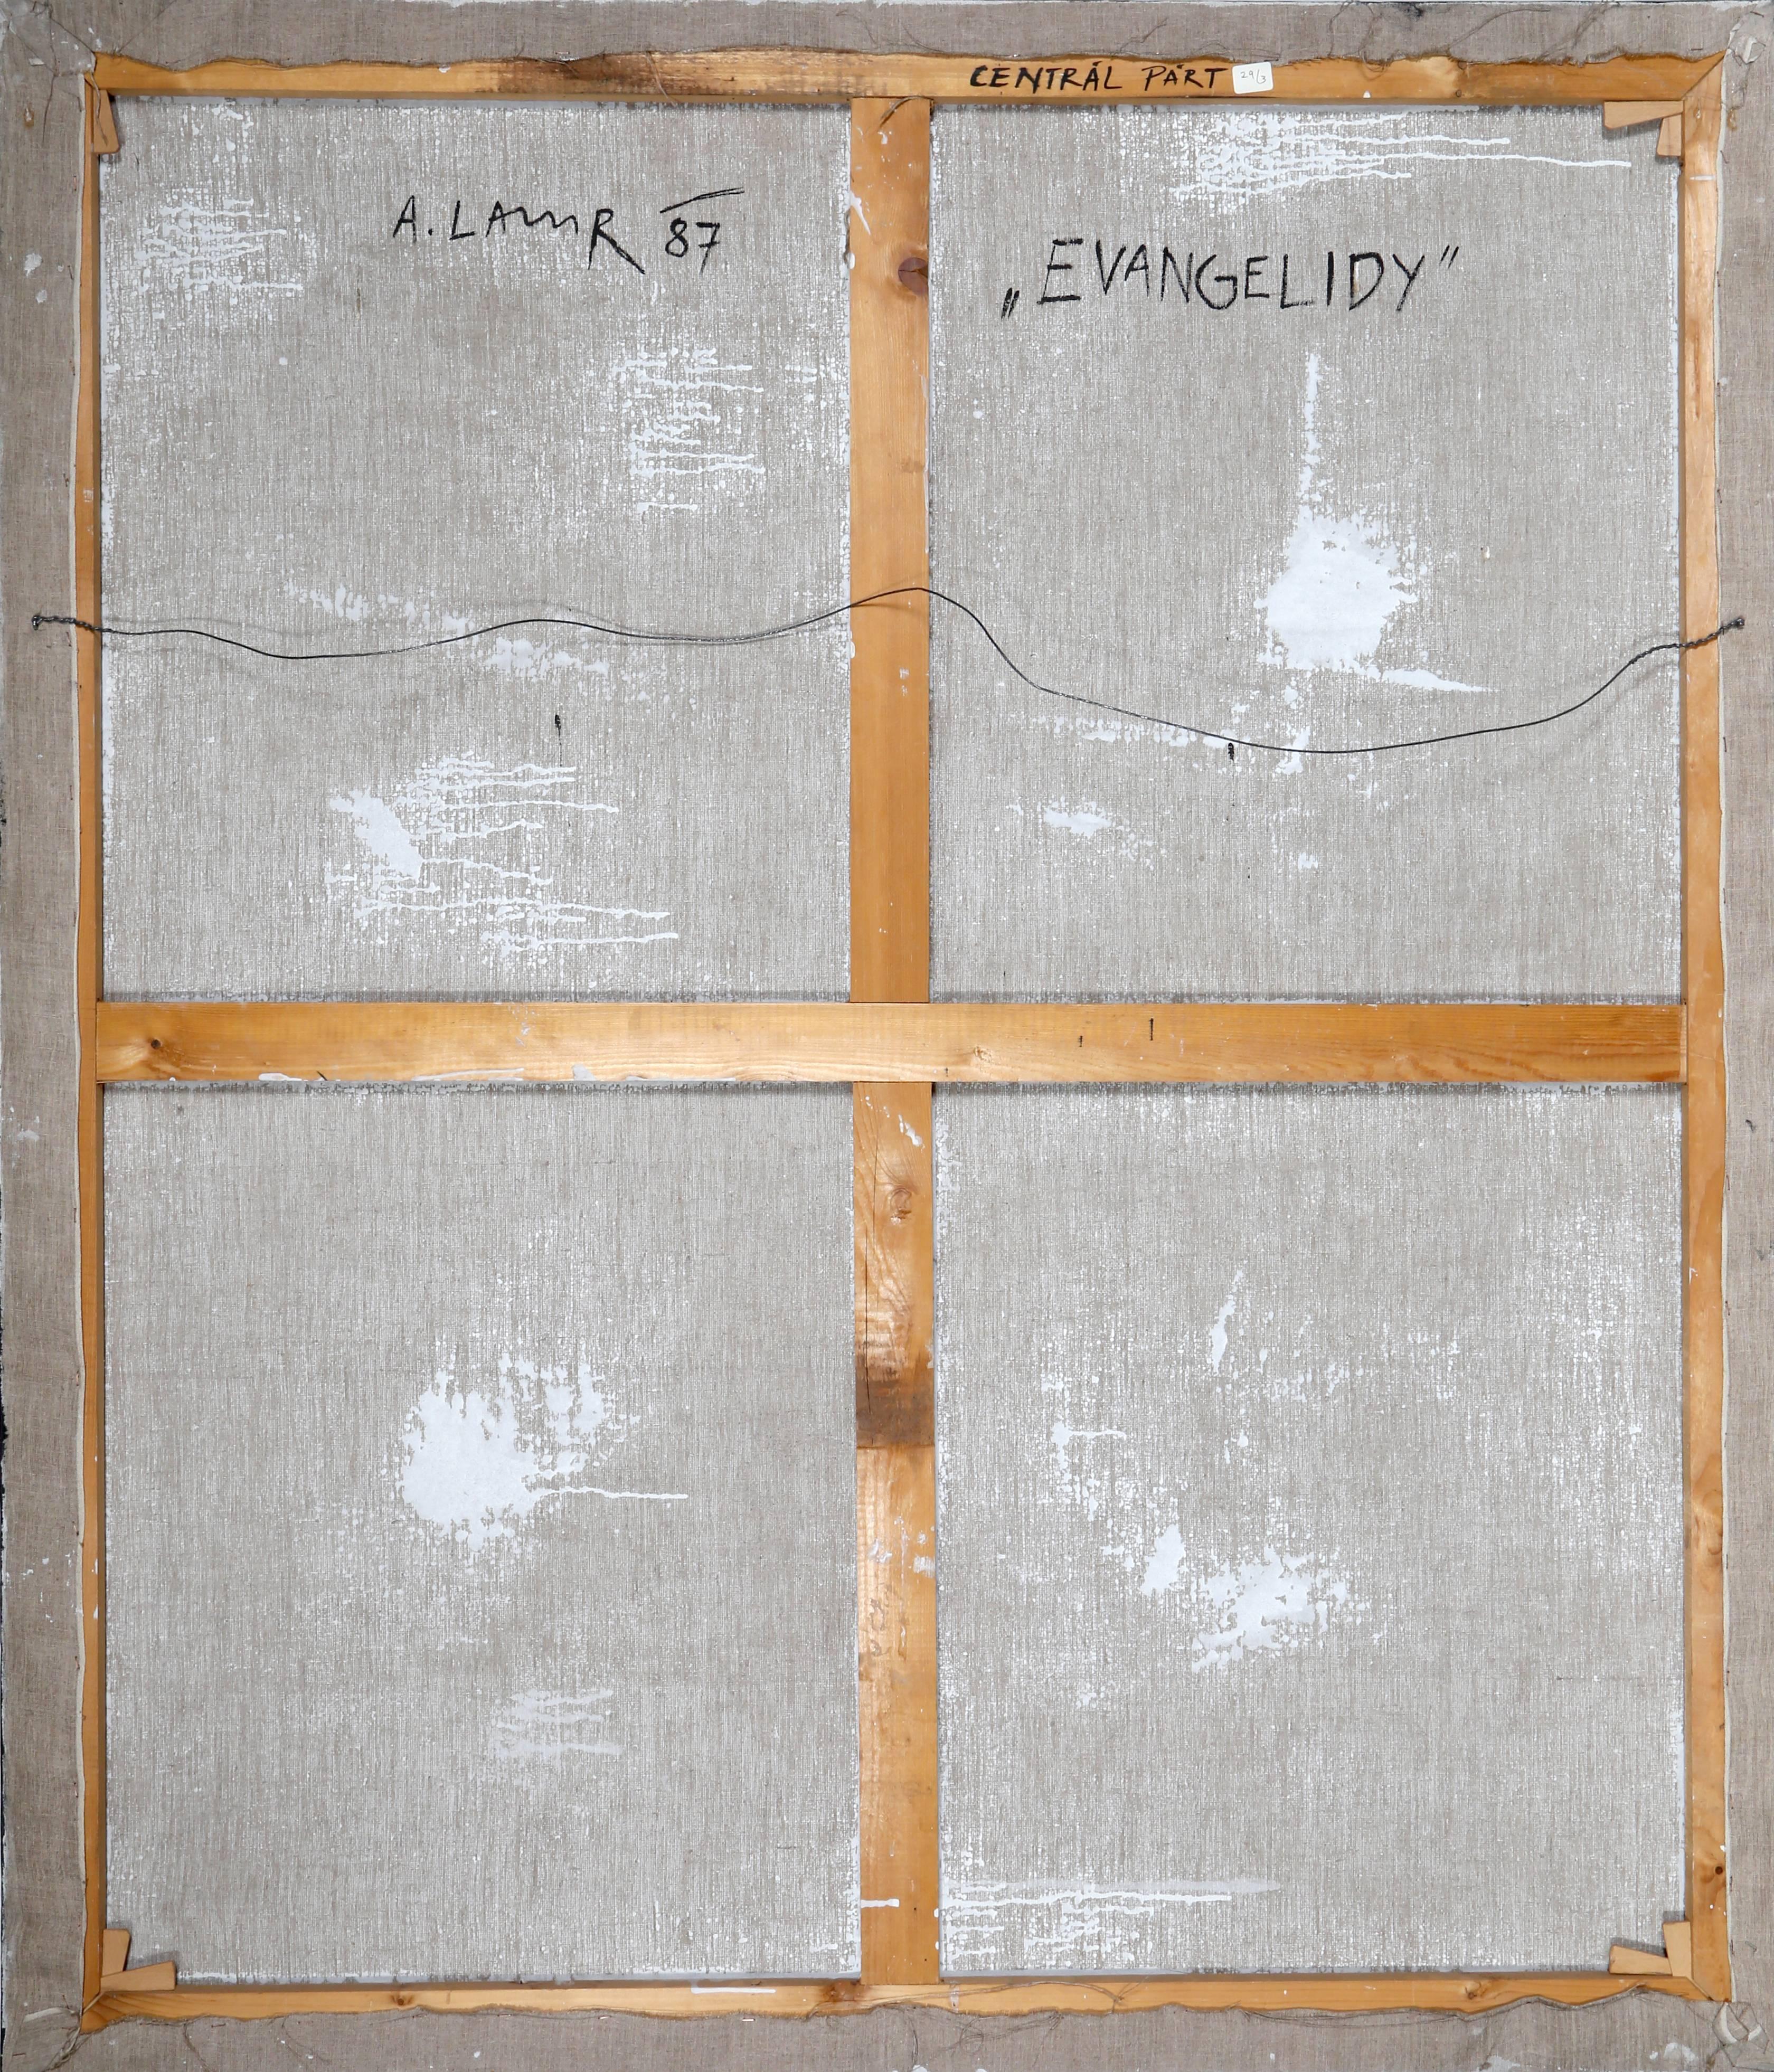 Evangelidy, Triptych of Three Large Paintings by Ales Lamr 4